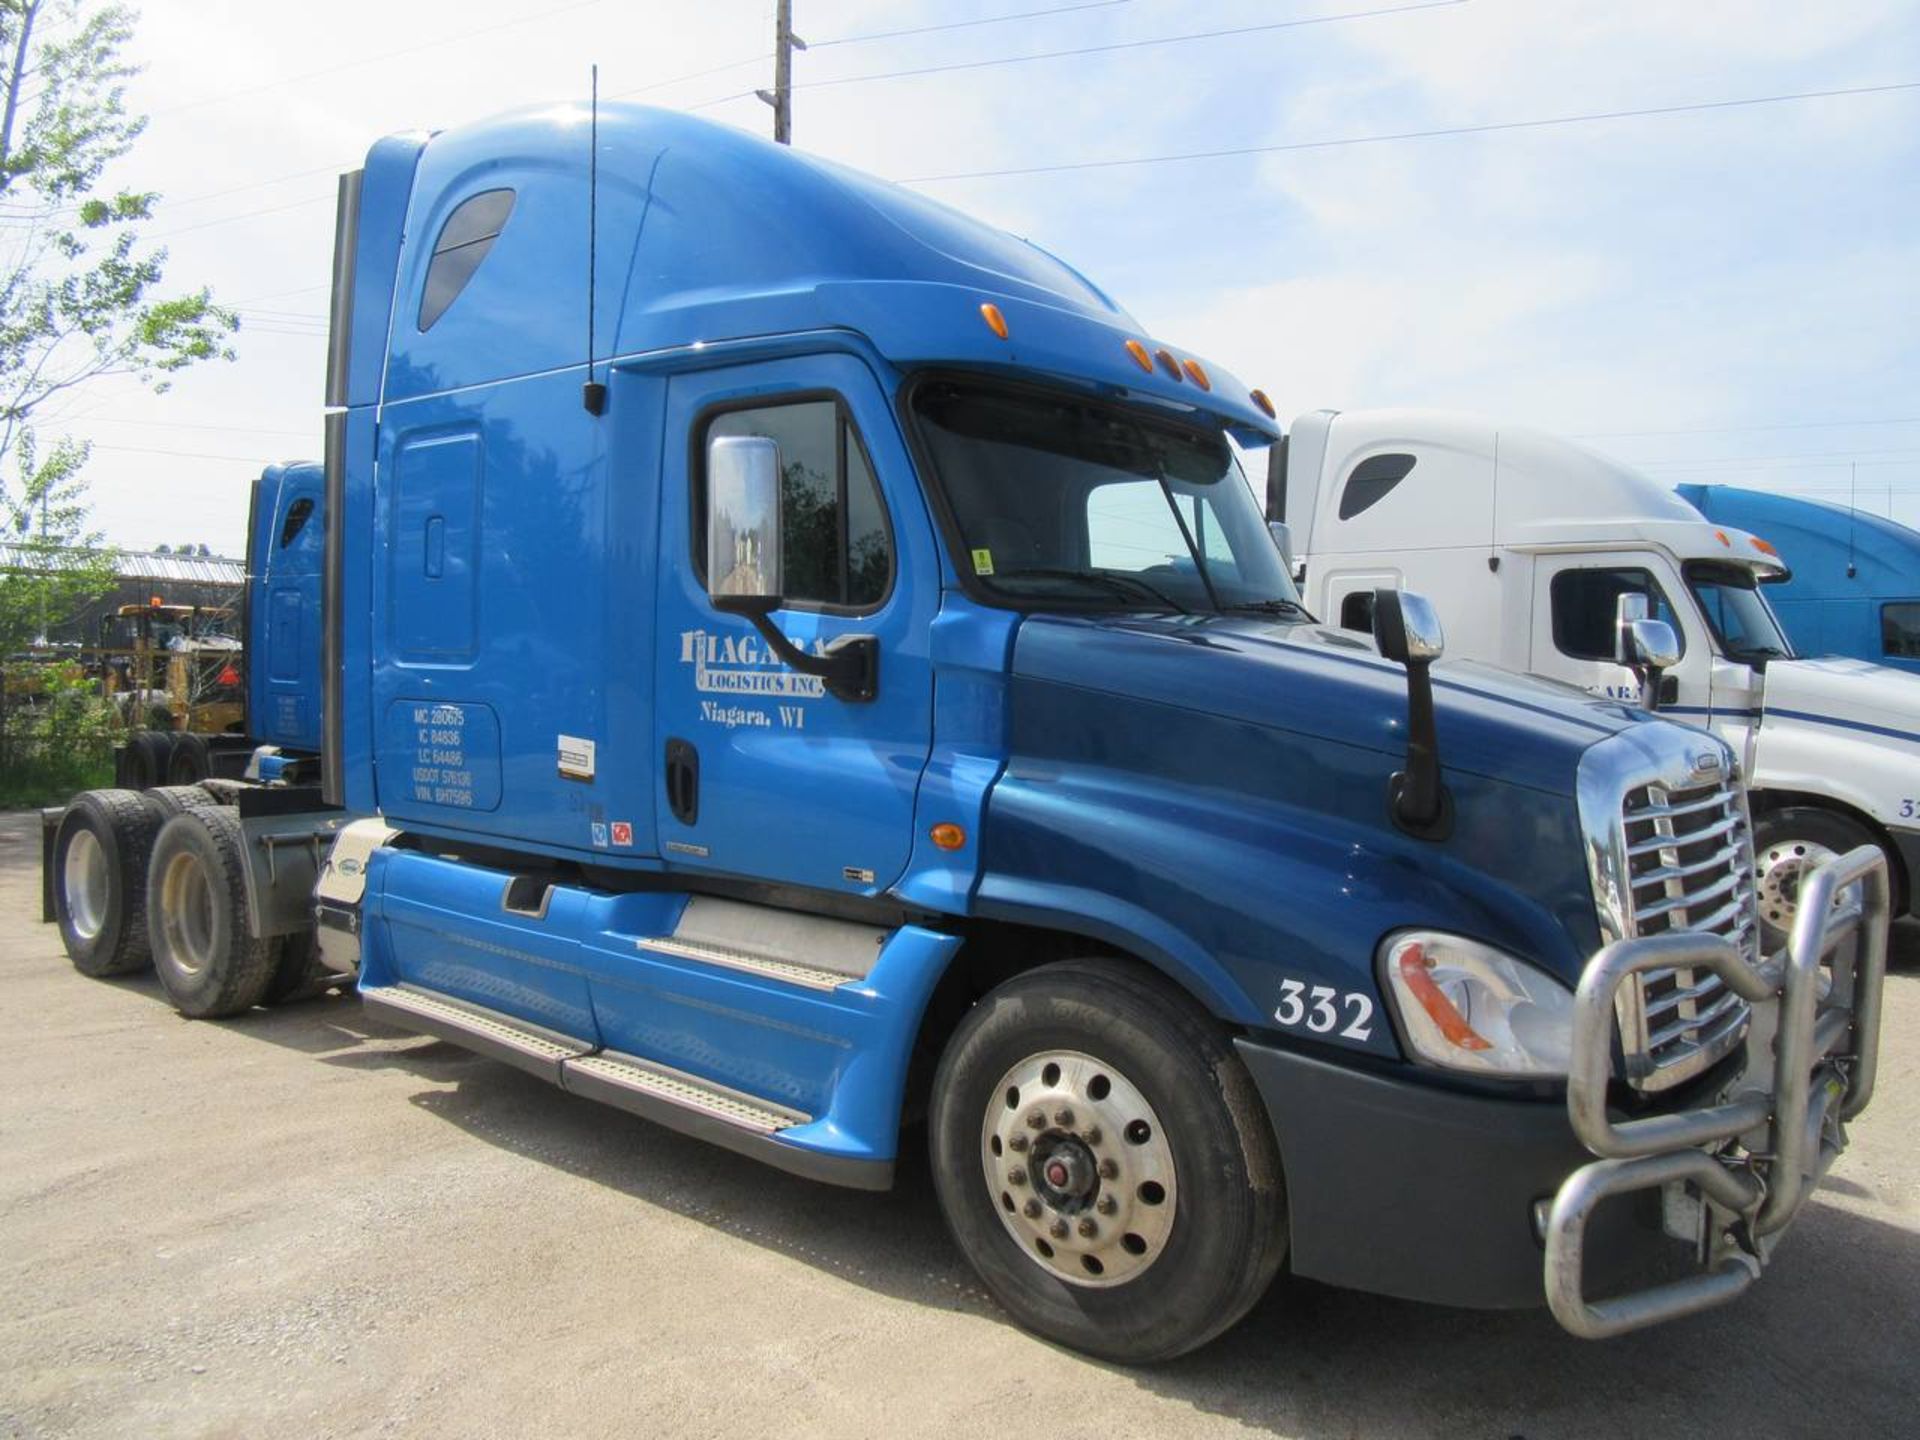 2012 Freightliner Cascadia Tractor - Image 3 of 10